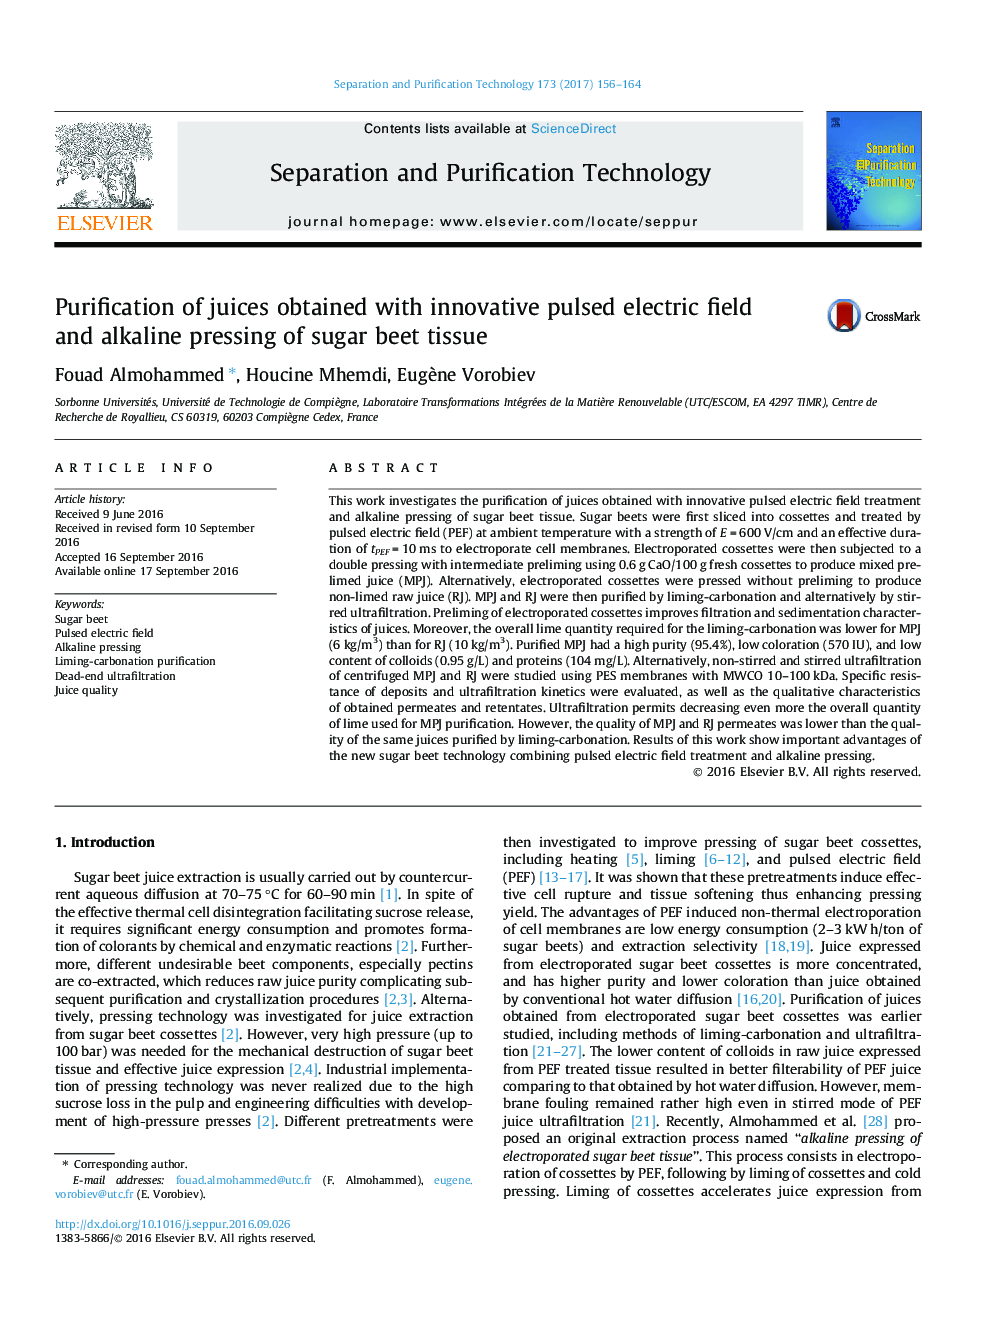 Purification of juices obtained with innovative pulsed electric field and alkaline pressing of sugar beet tissue